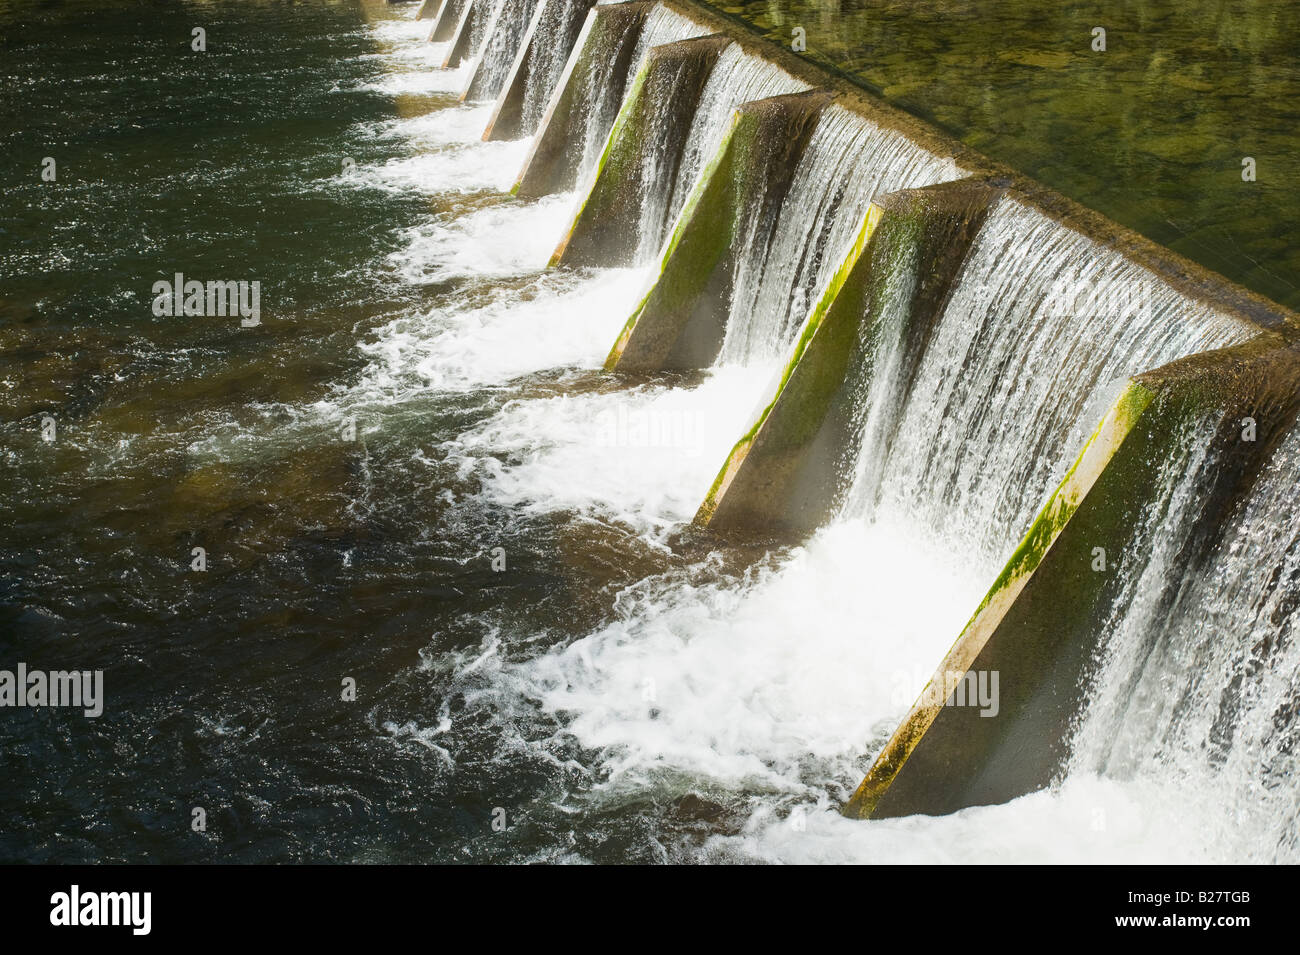 Water pouring over dam, Vancouver, British Columbia, Canada Stock Photo